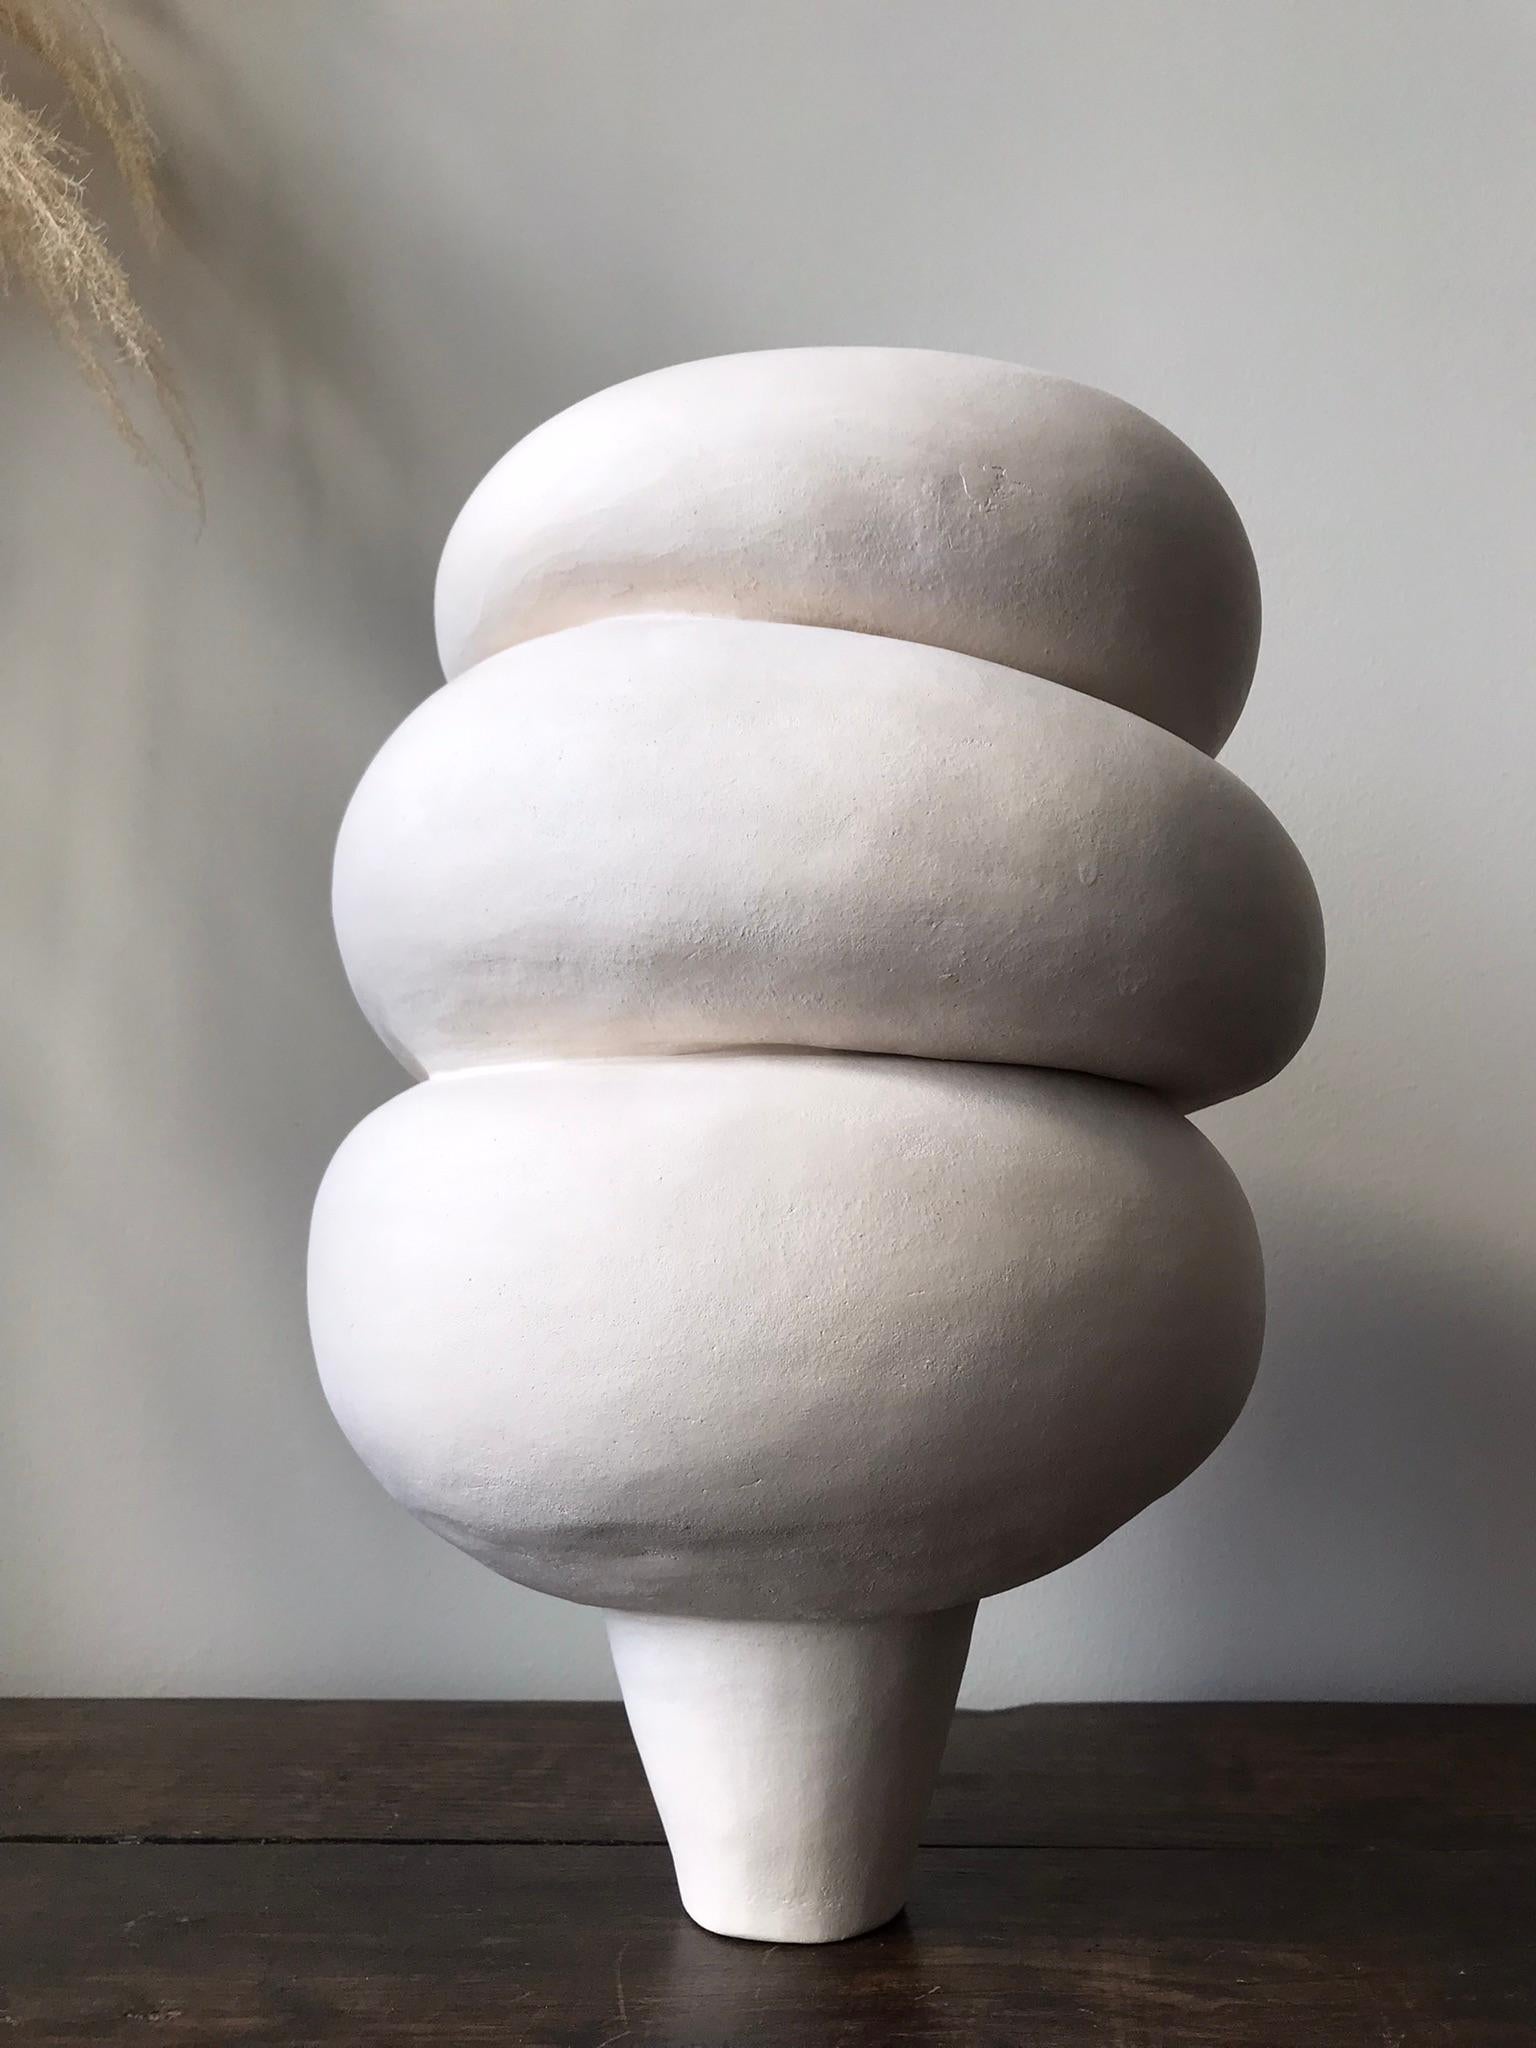 Dutch Contemporary Sculptural Ceramic Art Modder Calmness by Françoise Jeffrey In New Condition For Sale In Amsterdam, NL